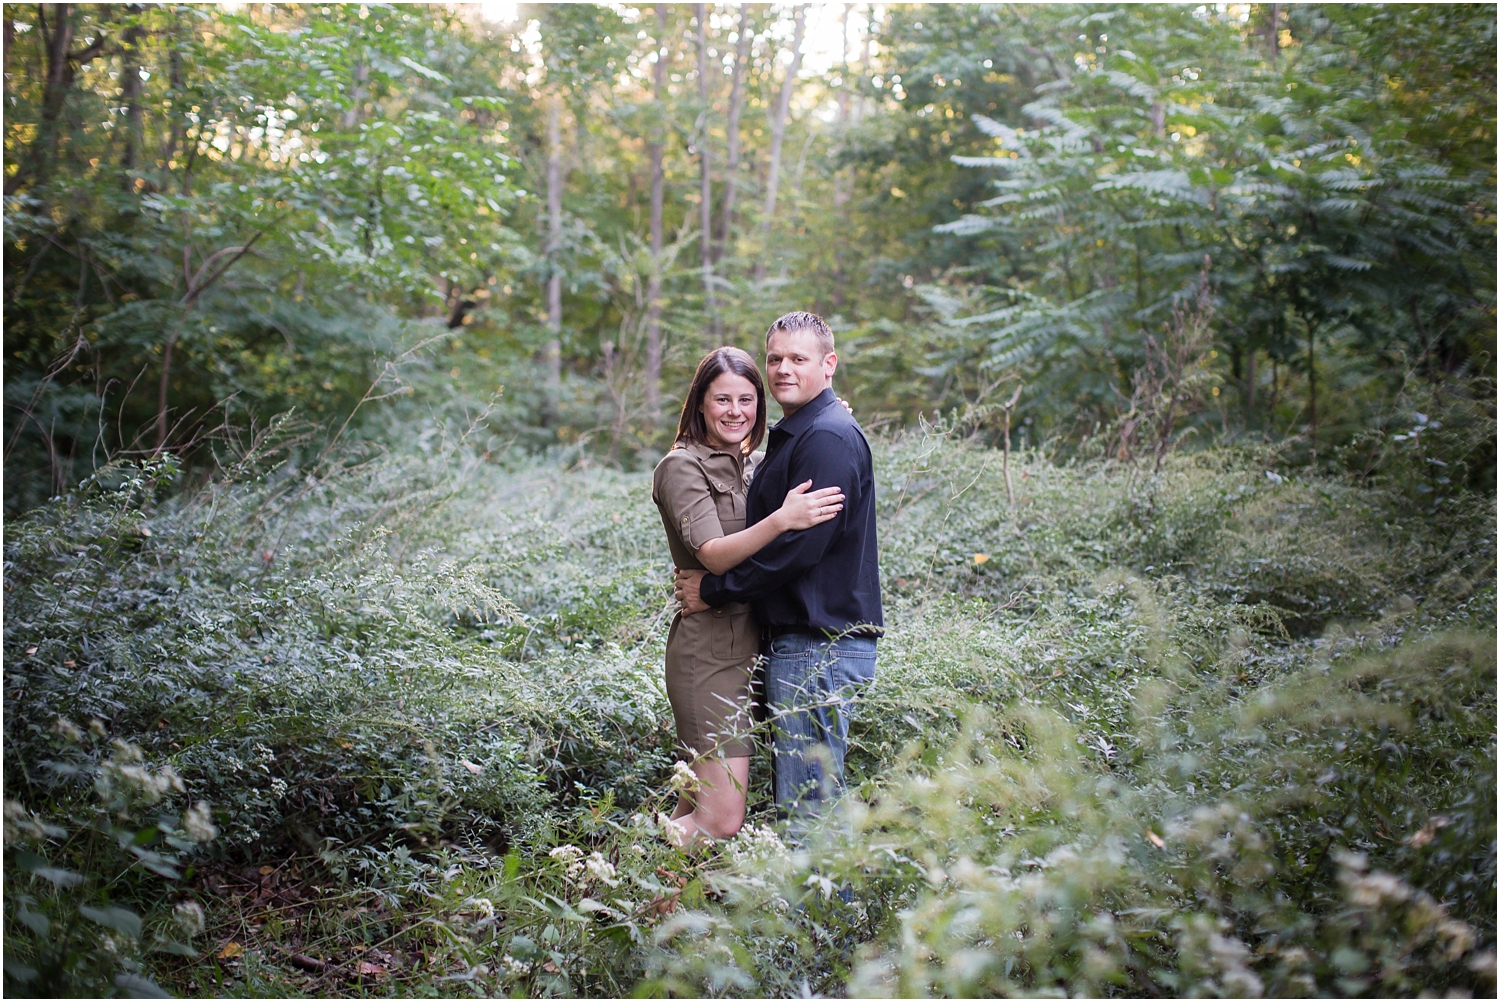 Fall engagement session in new jersey with dogs